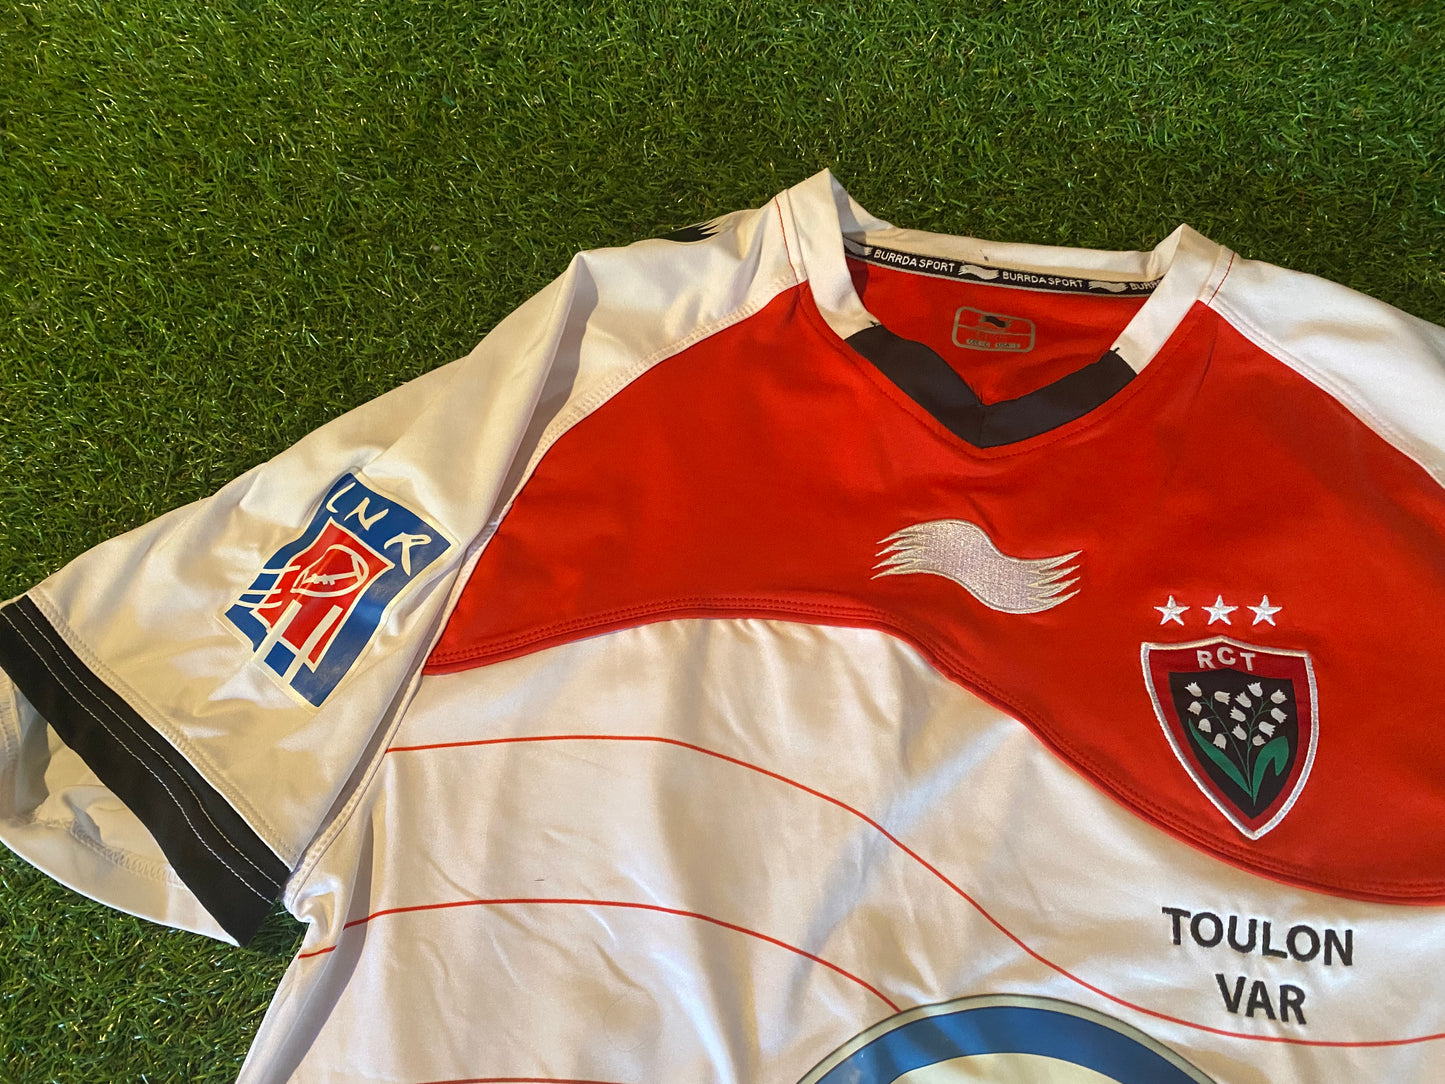 RCT Touloun France French Rugby Union Football Large Mans Player Issued Jersey